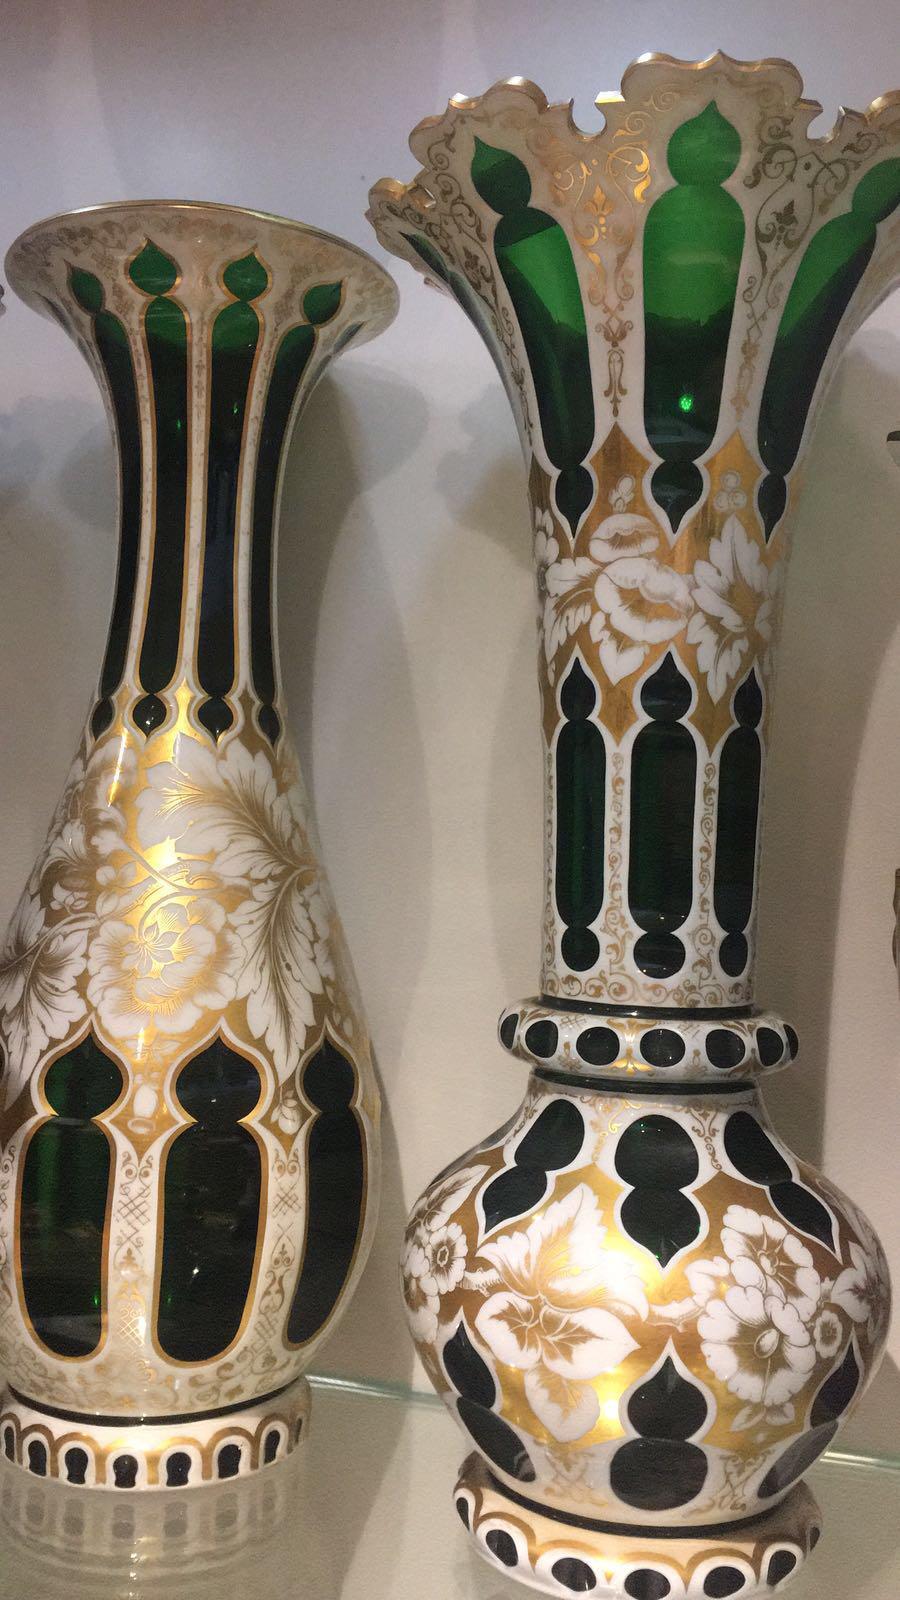 Made of green glass they are enameled in white which is then painted in gold with a floral design, and further gilded in a way to emphasis their design. Two of the glasses are an identical pair and feature a 'Persian' shape of the bottle with a